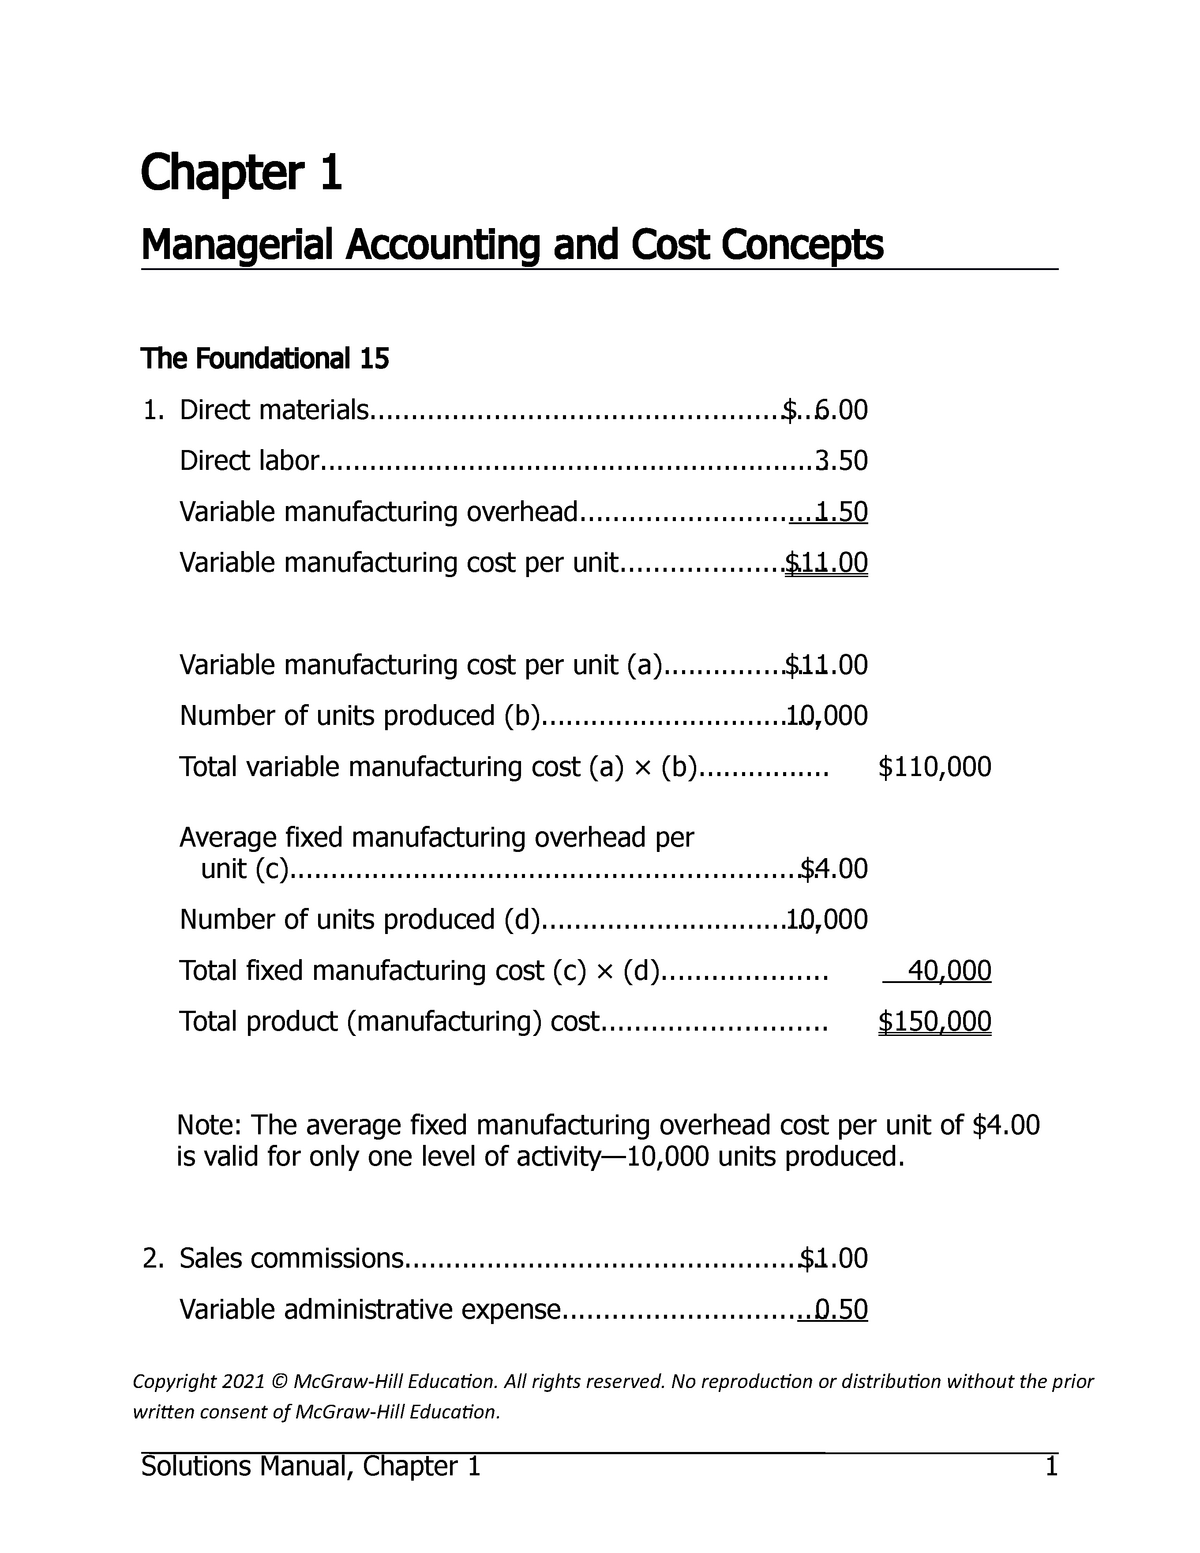 mcgraw hill accounting chapter 1 homework